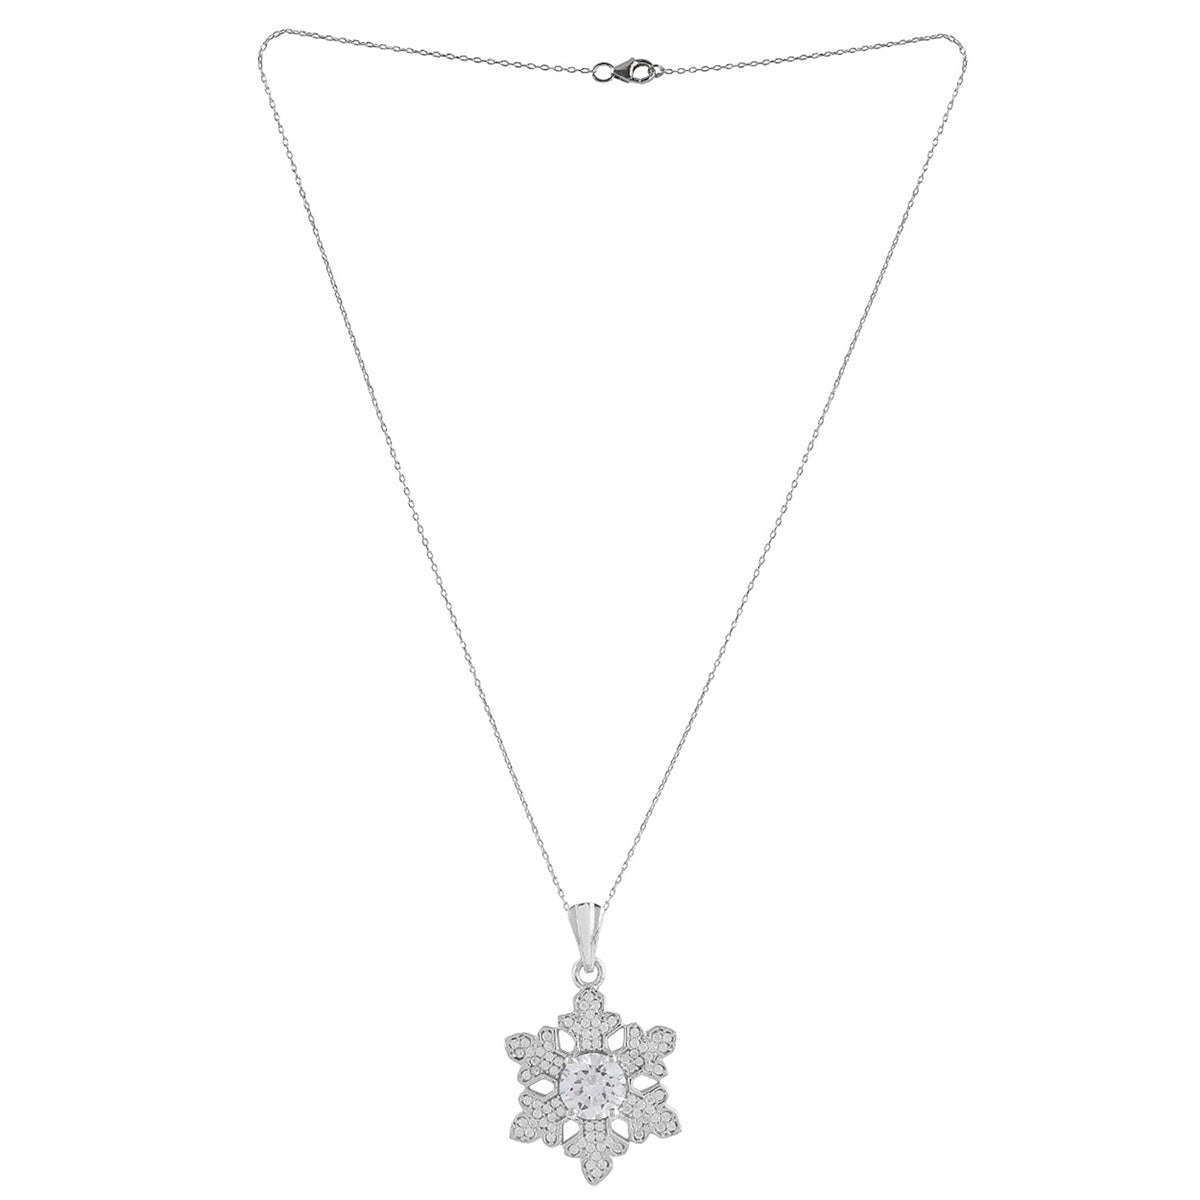 Delicate Snowflake Necklace - silver gold rose gold plated – LucidNewYork